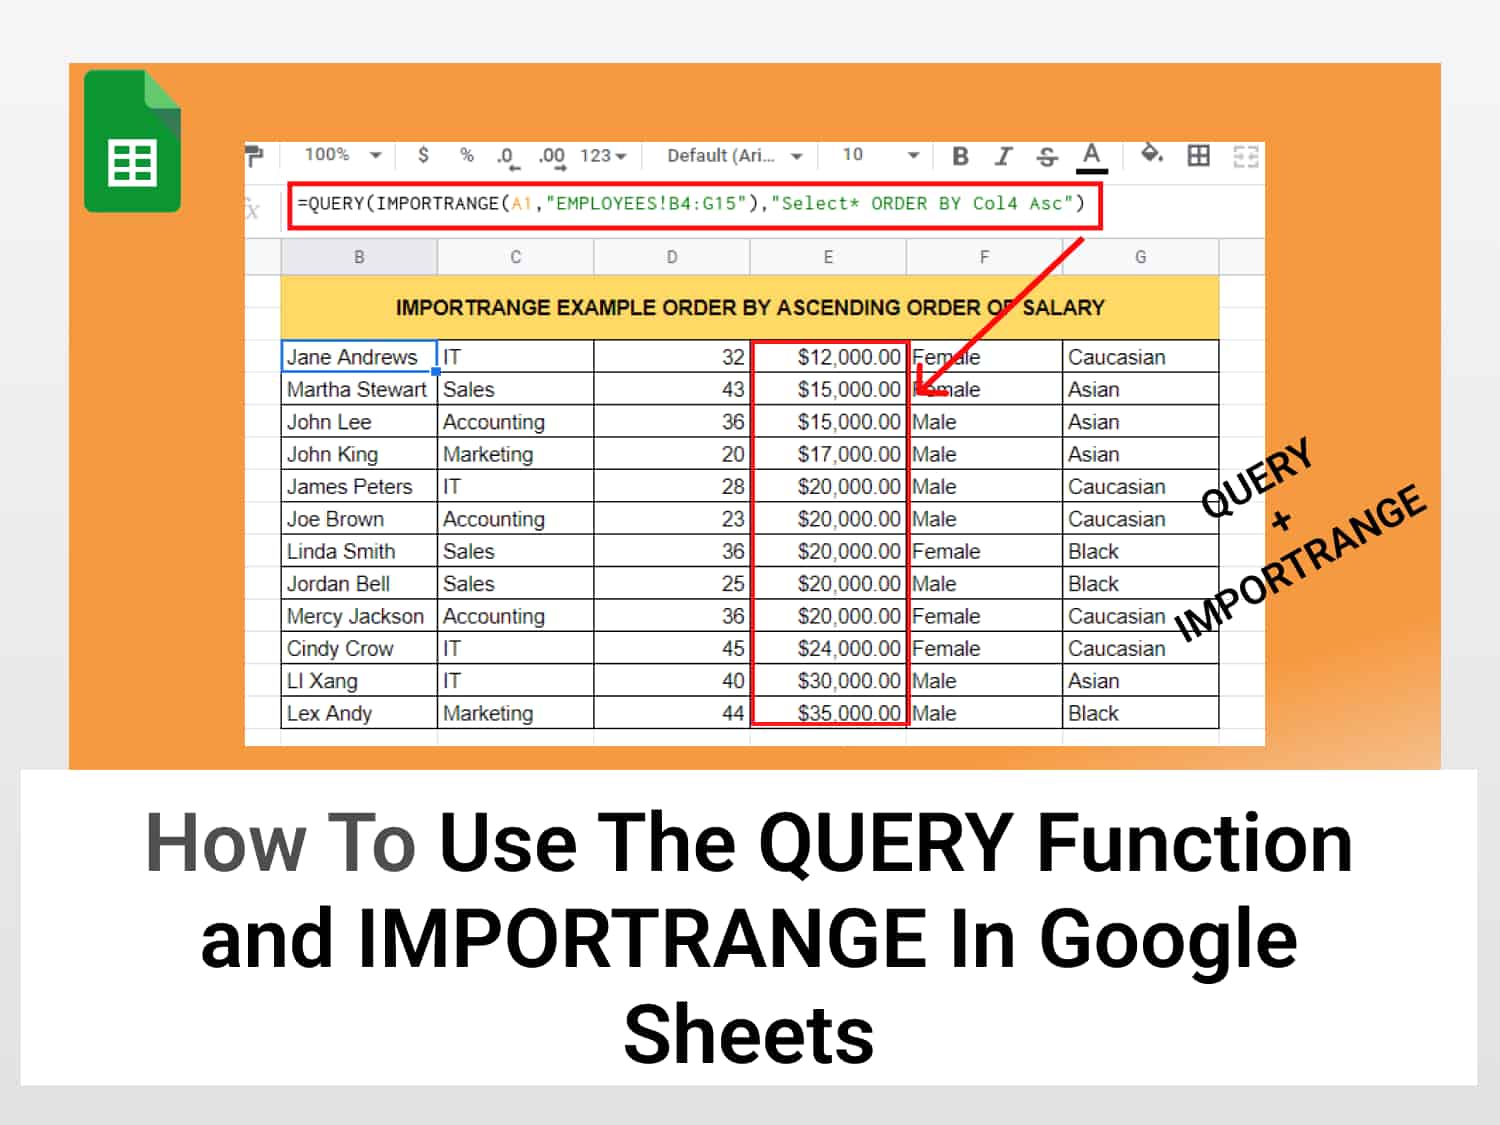 How to use the QUERY function with IMPORTRANGE in Google Sheets